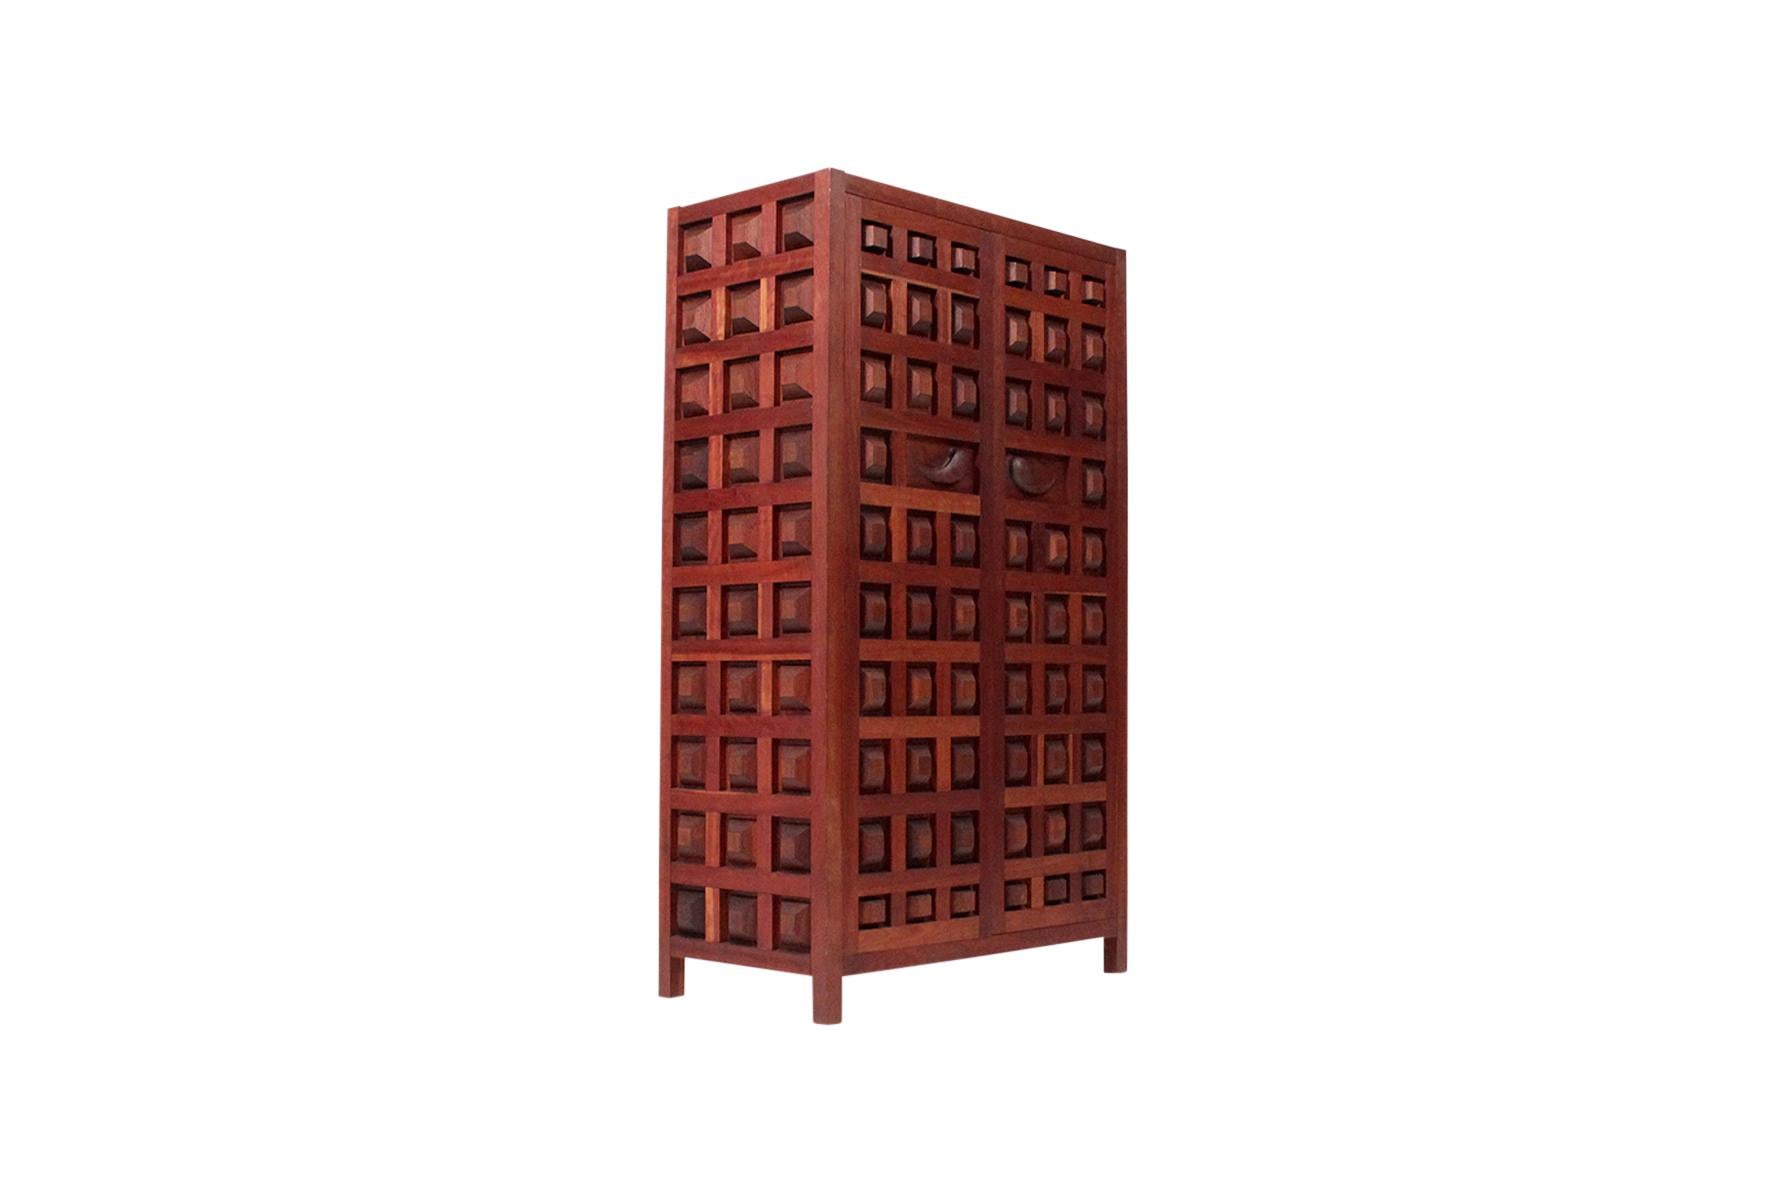 Large and unique hand carved wooden wardrobe cabinet by noted Virginian master craftsman Sam Forrest. Intricately and deeply carved, the surface is textured with a bold geometric pattern.